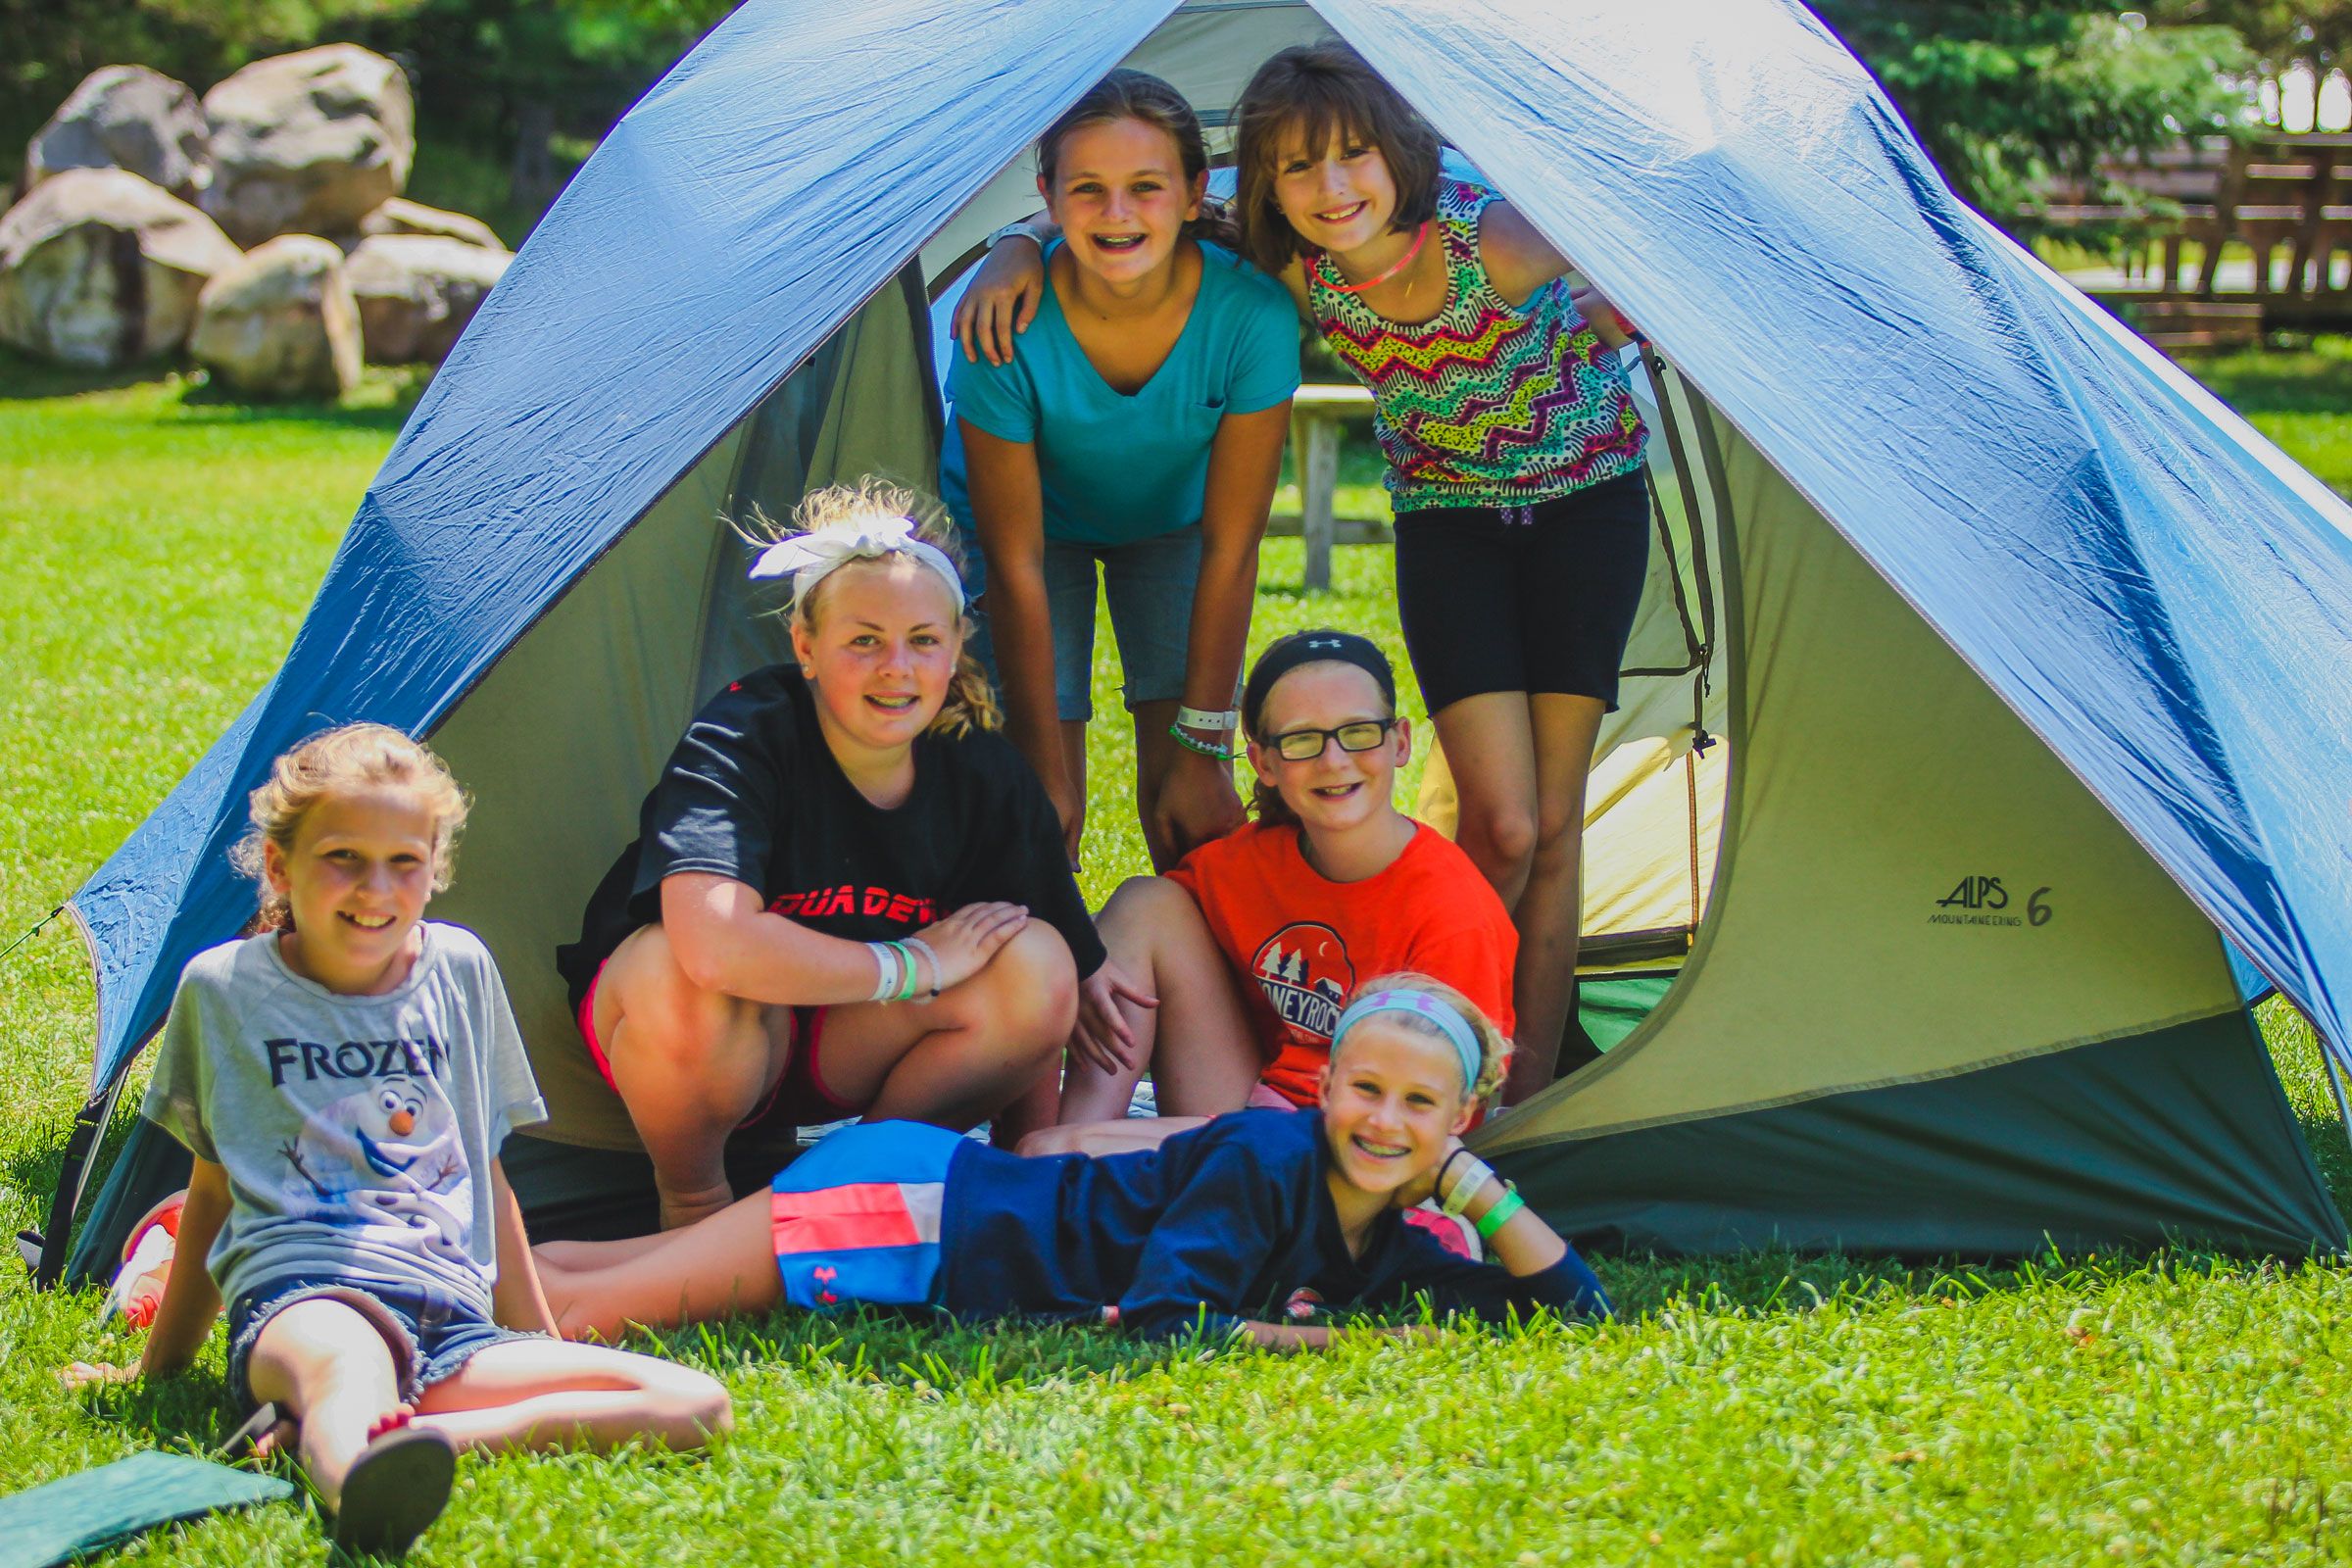 These campers set up their own tent! We equip all campers with the gear they need to go on their camp out or wilderness trip and teach them how to use it.